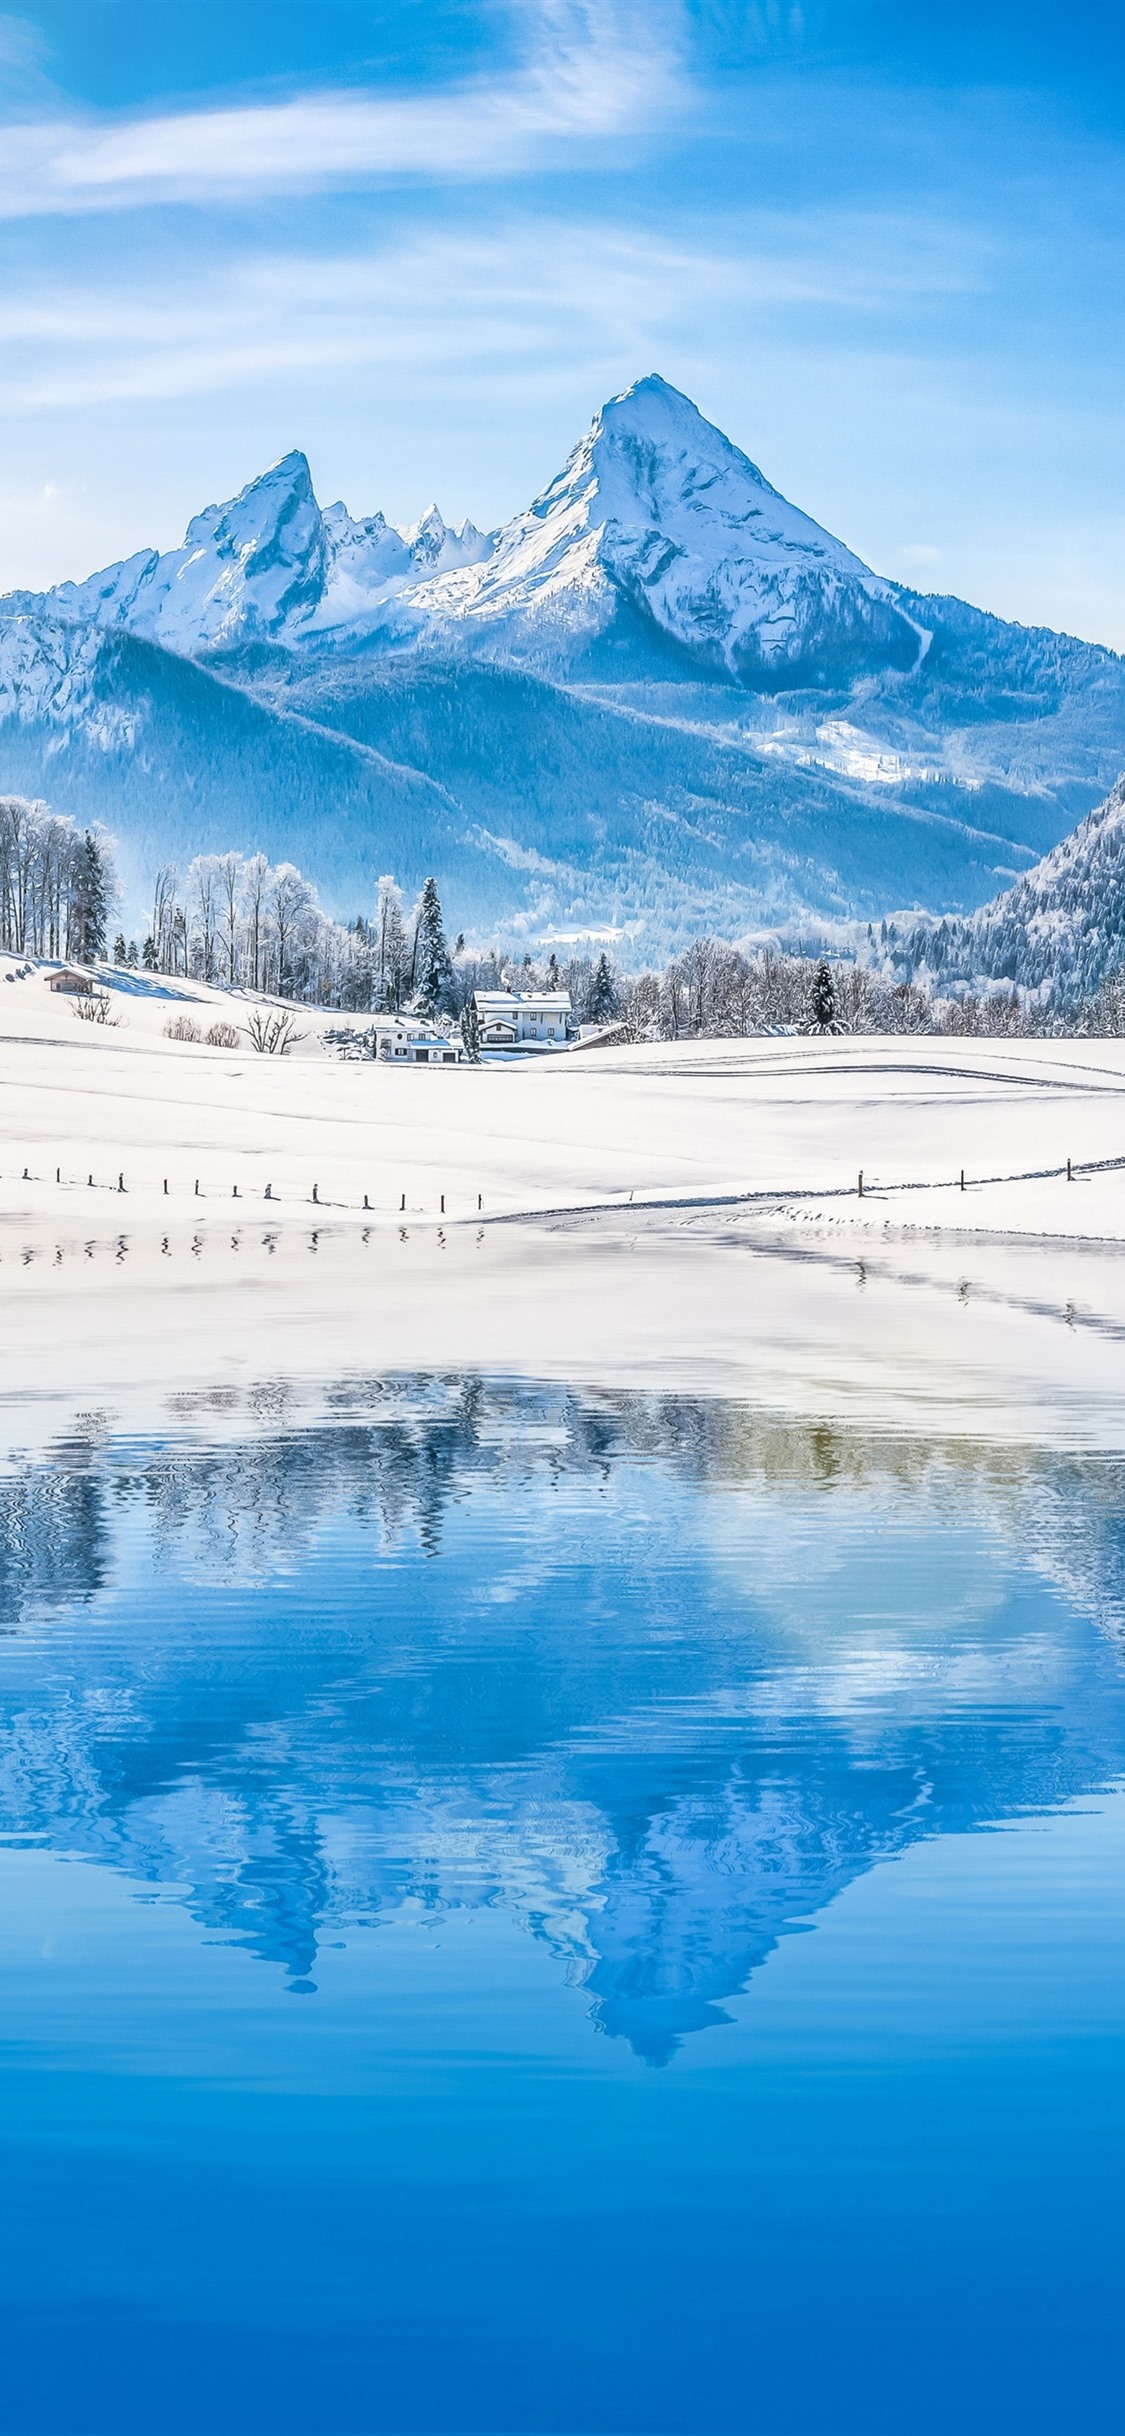 Mountains, Trees, Snow, Lake, Water Reflection, Winter 1242x2688 IPhone 11 Pro XS Max Wallpaper, Background, Picture, Image